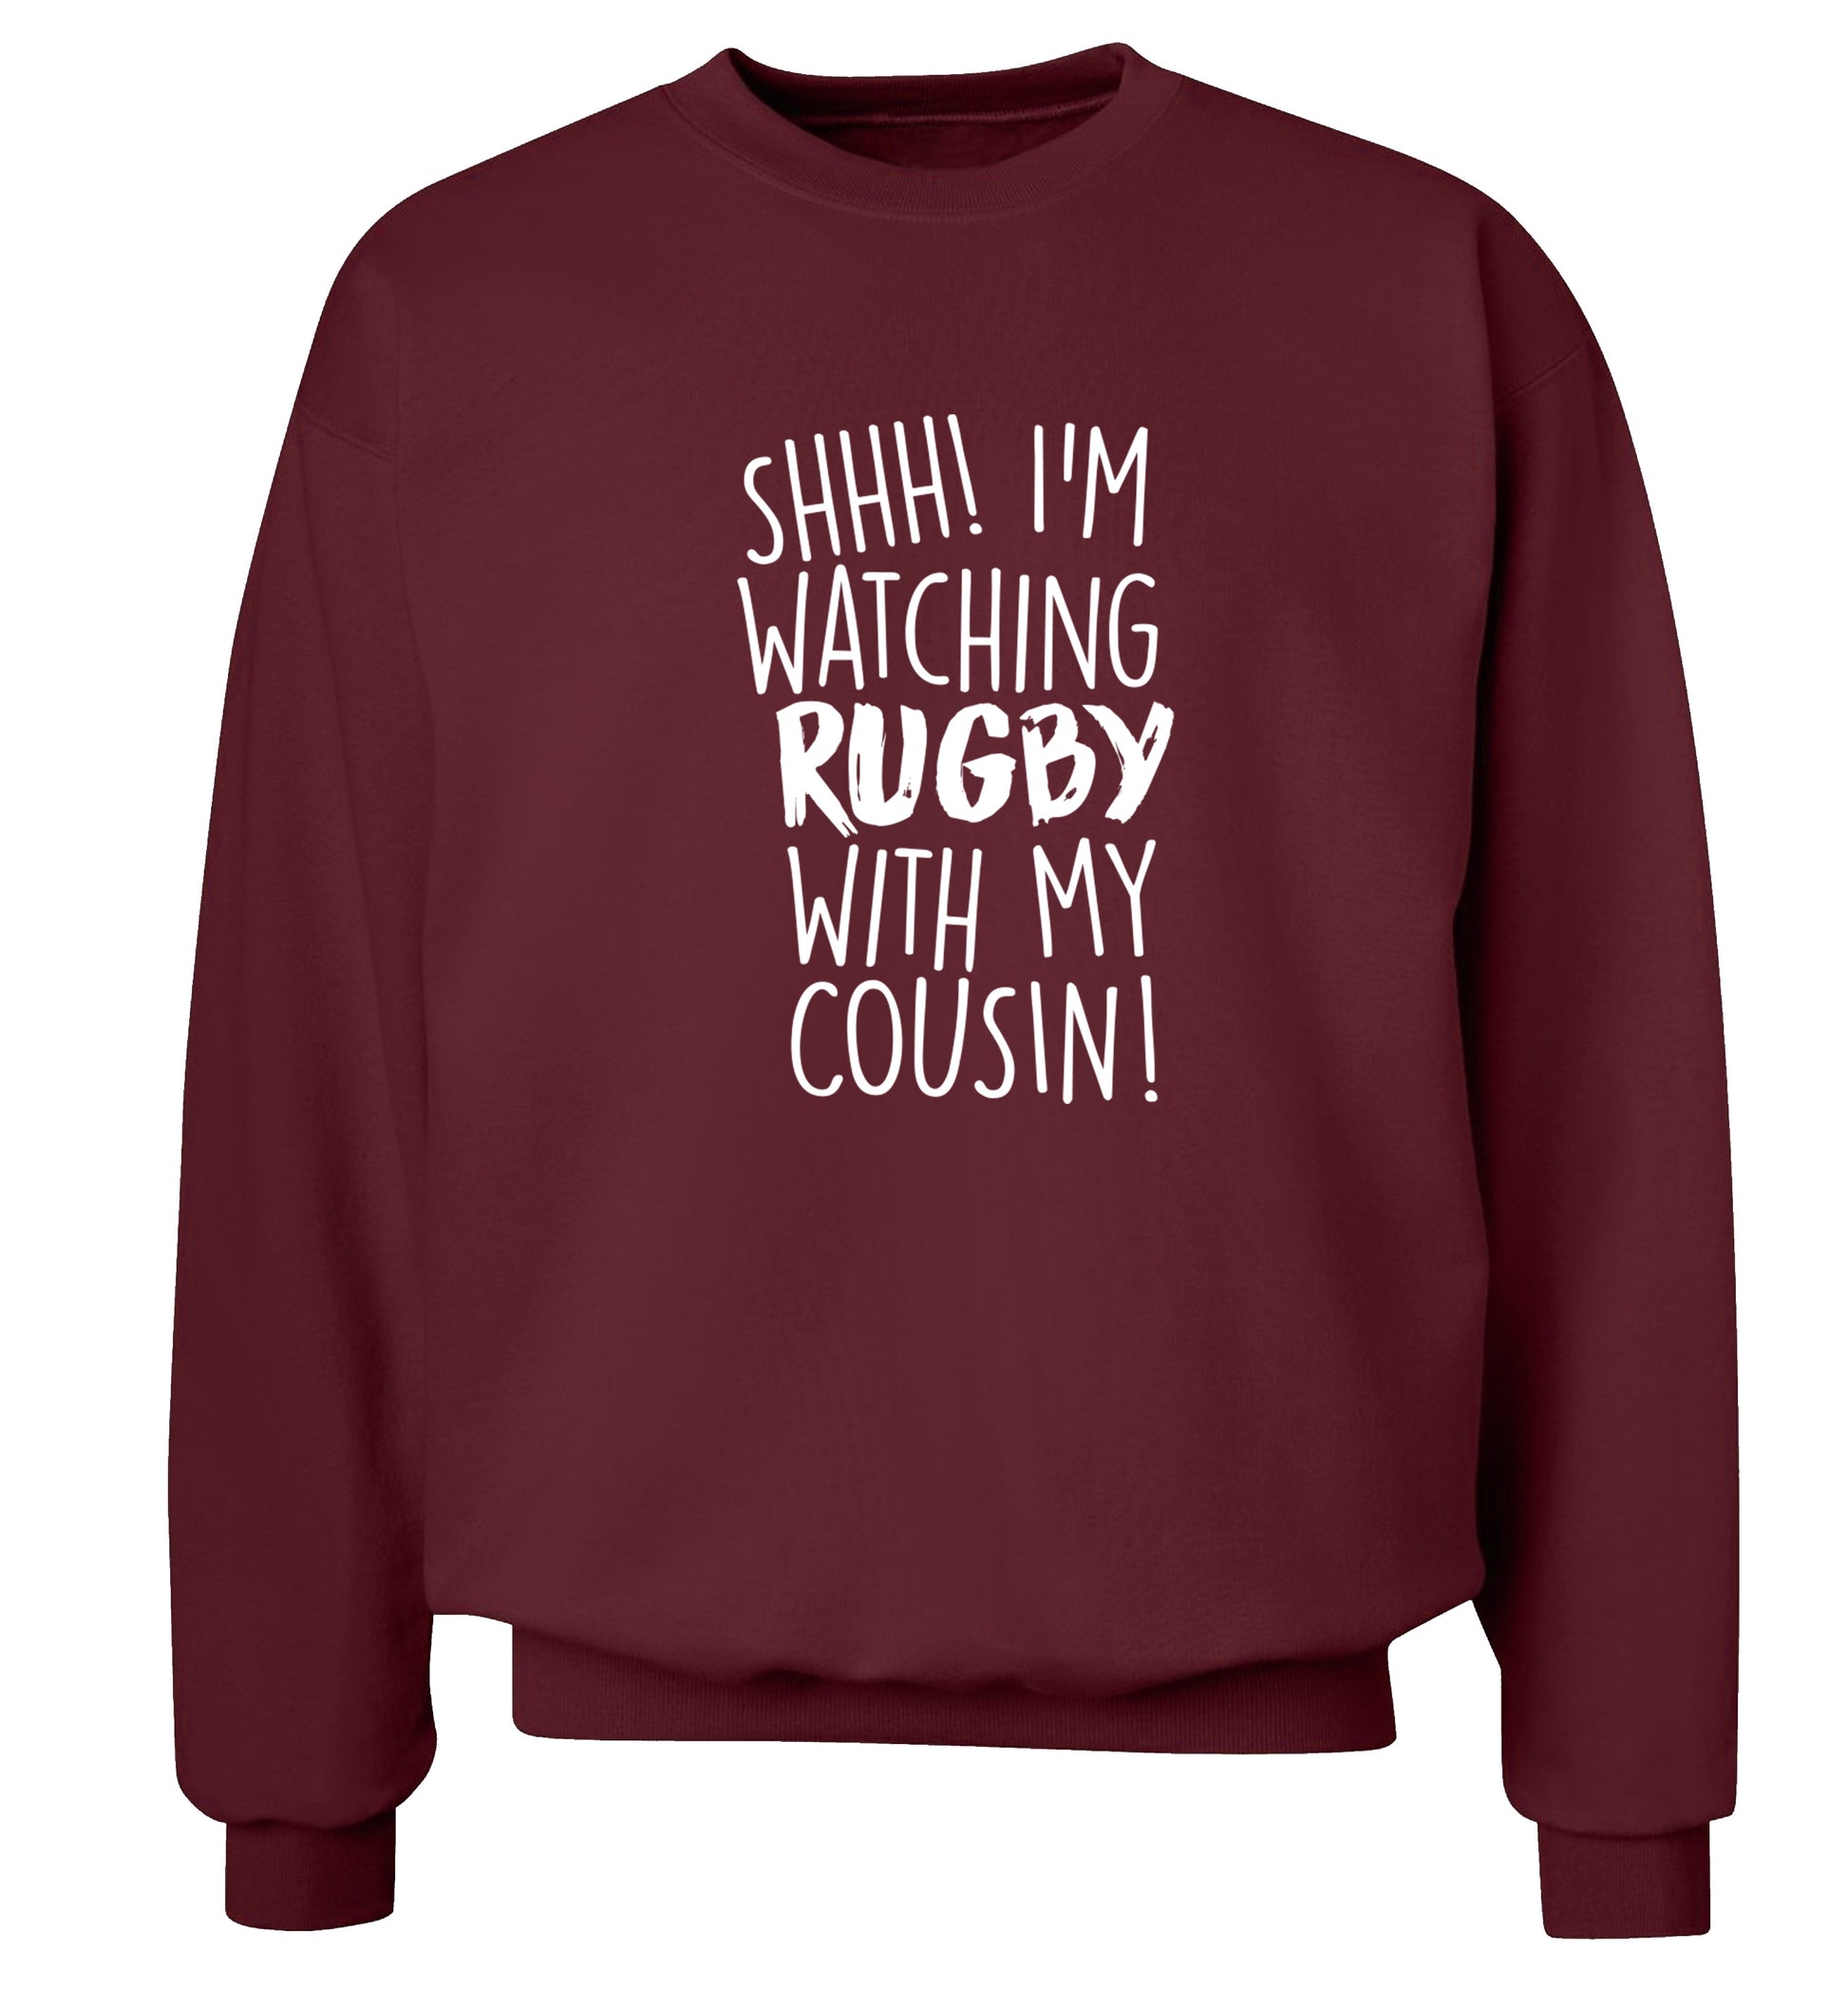 Shhh I'm watching rugby with my cousin Adult's unisex maroon Sweater 2XL